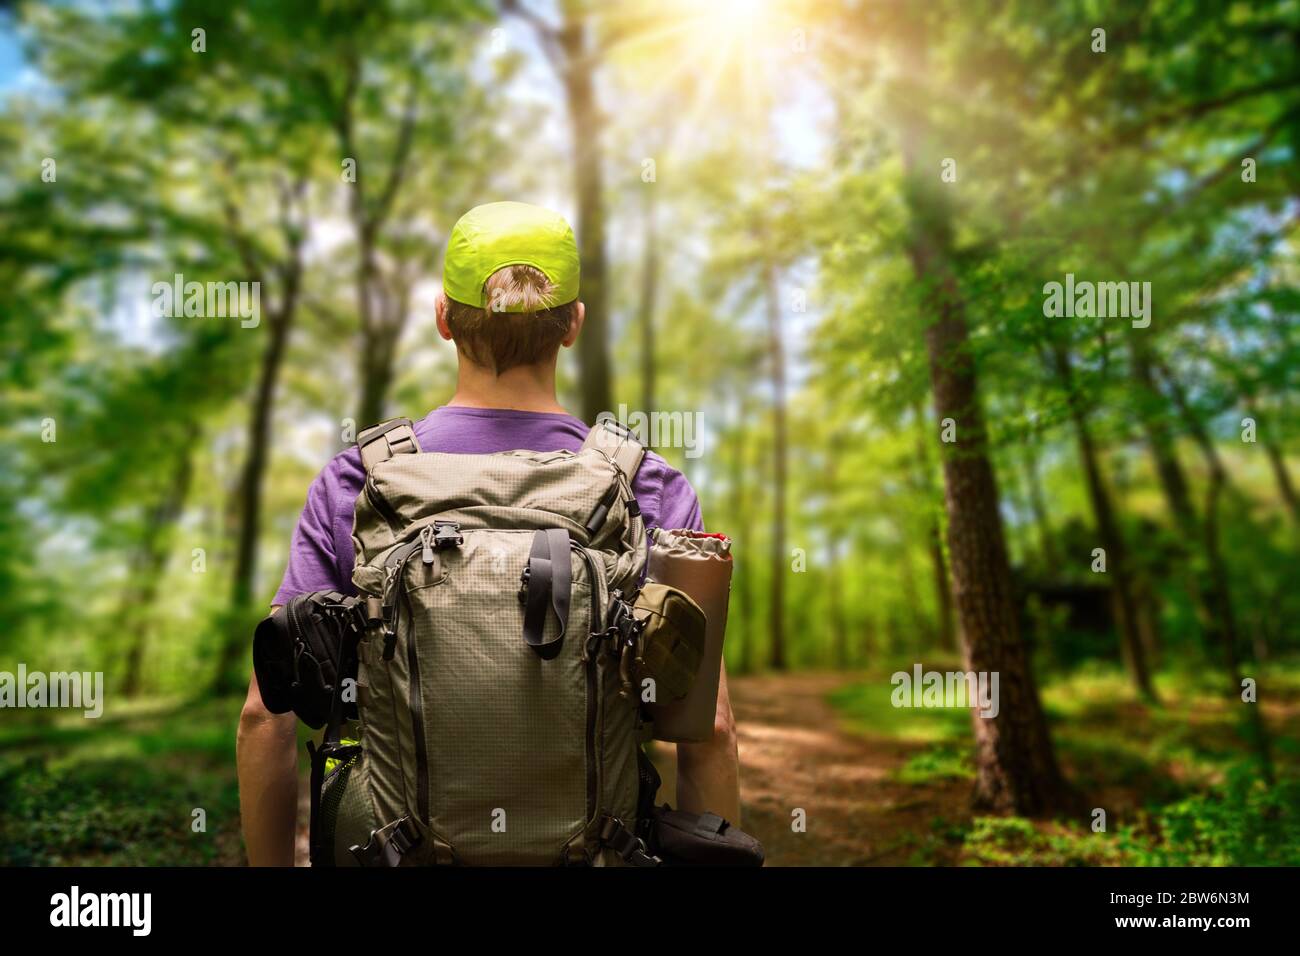 Male hiker with a backpack exploring a path in a green forest with the sun shining above, shallow focus Stock Photo